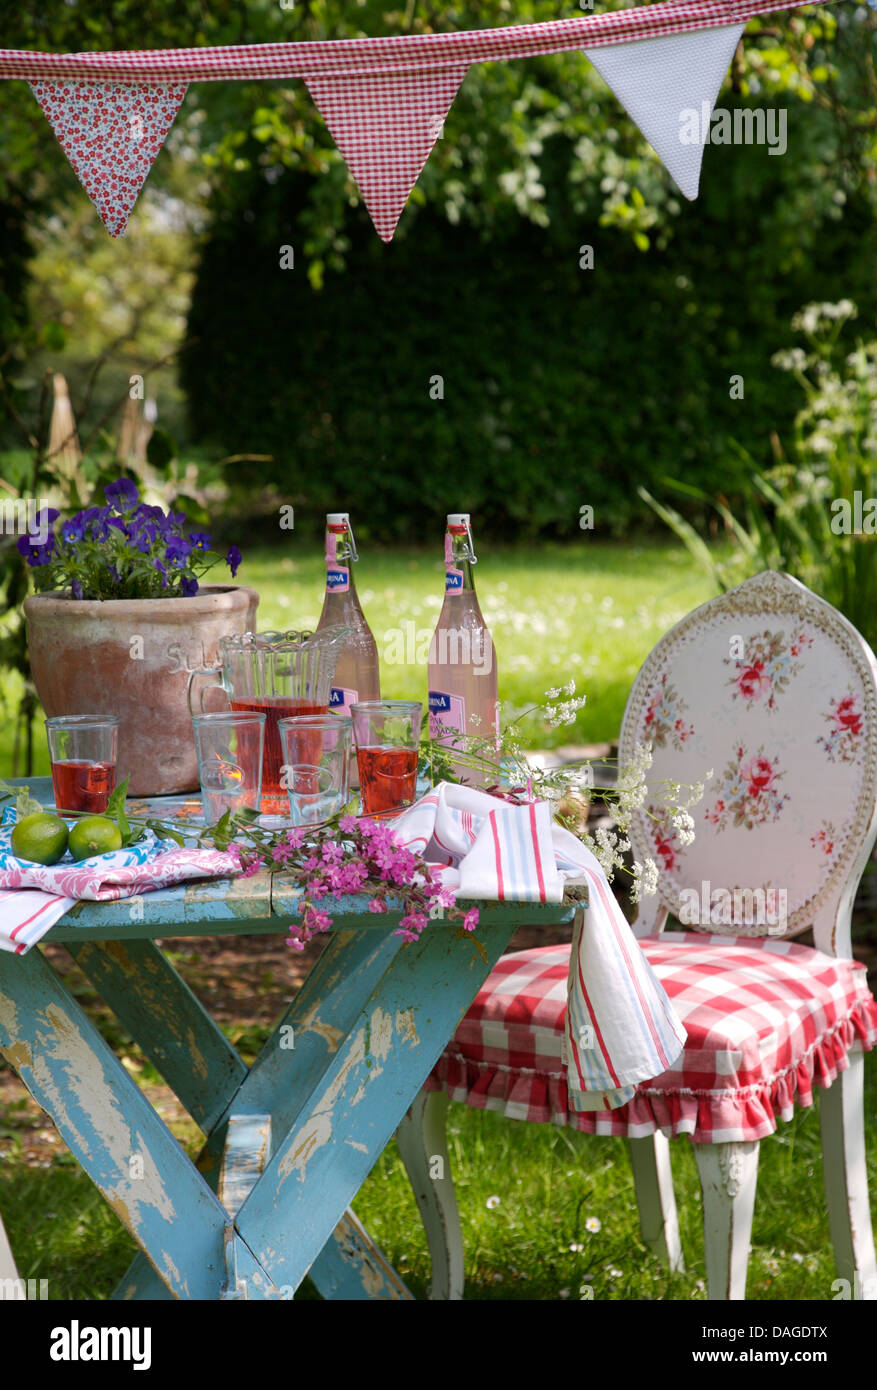 Summer Garden With Blue Painted Table Set For Lunch With Bottles